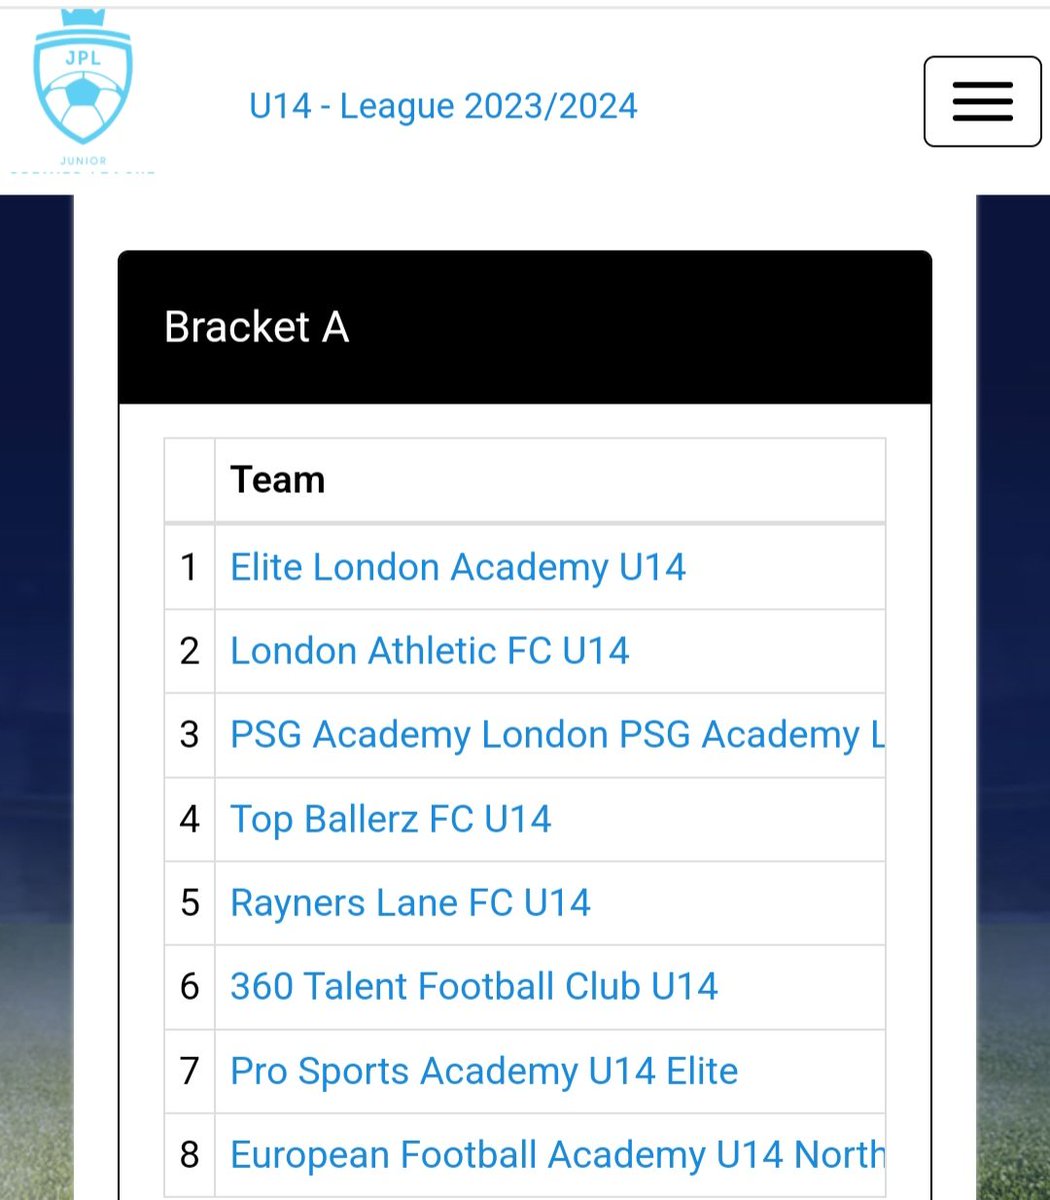 Victory in top-of-the-table clash ✔️ 

Man of the match for Christopher ✔️ 

Top of the Junior Premier League for Christmas ✔️ 

Well done, ELA u14's!

#GrassRootsFootball #elitelondonacademy